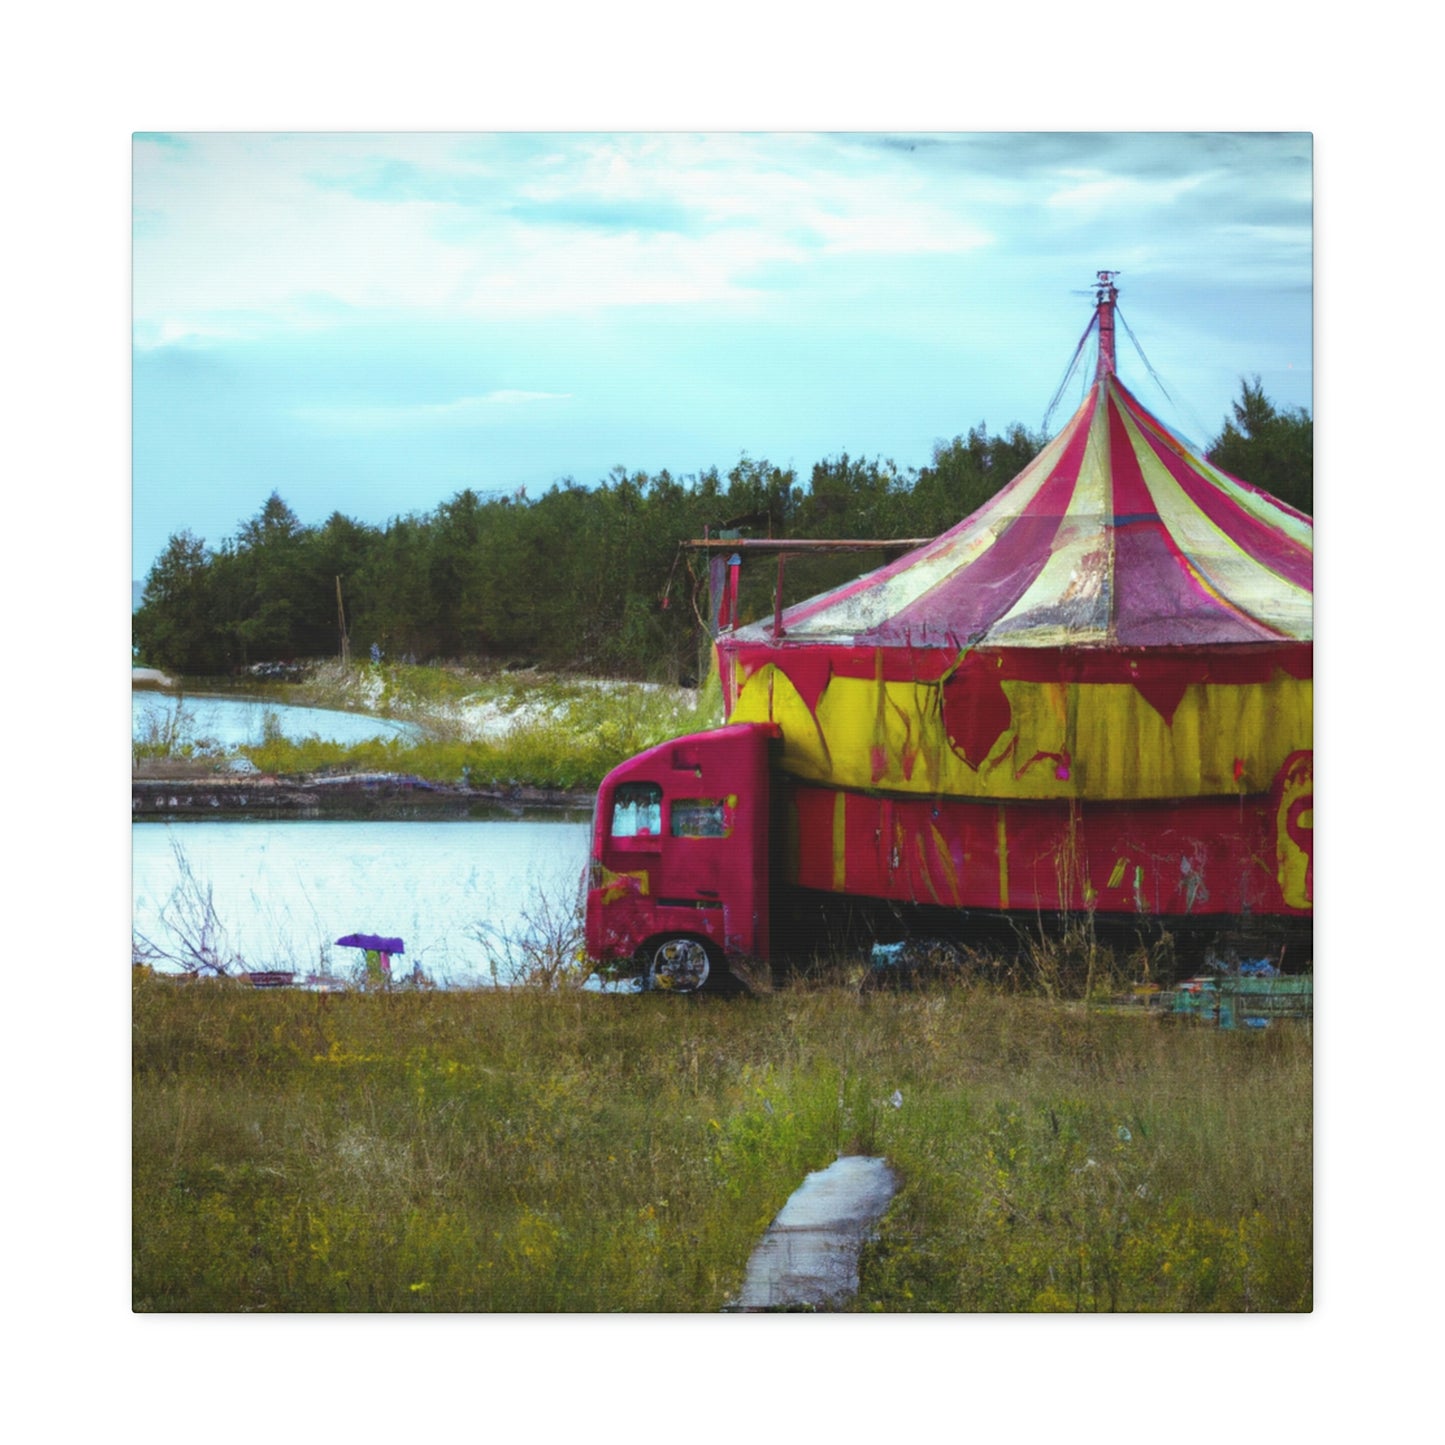 "The Island of Wonders: A Spectacular Traveling Circus" - The Alien Canva